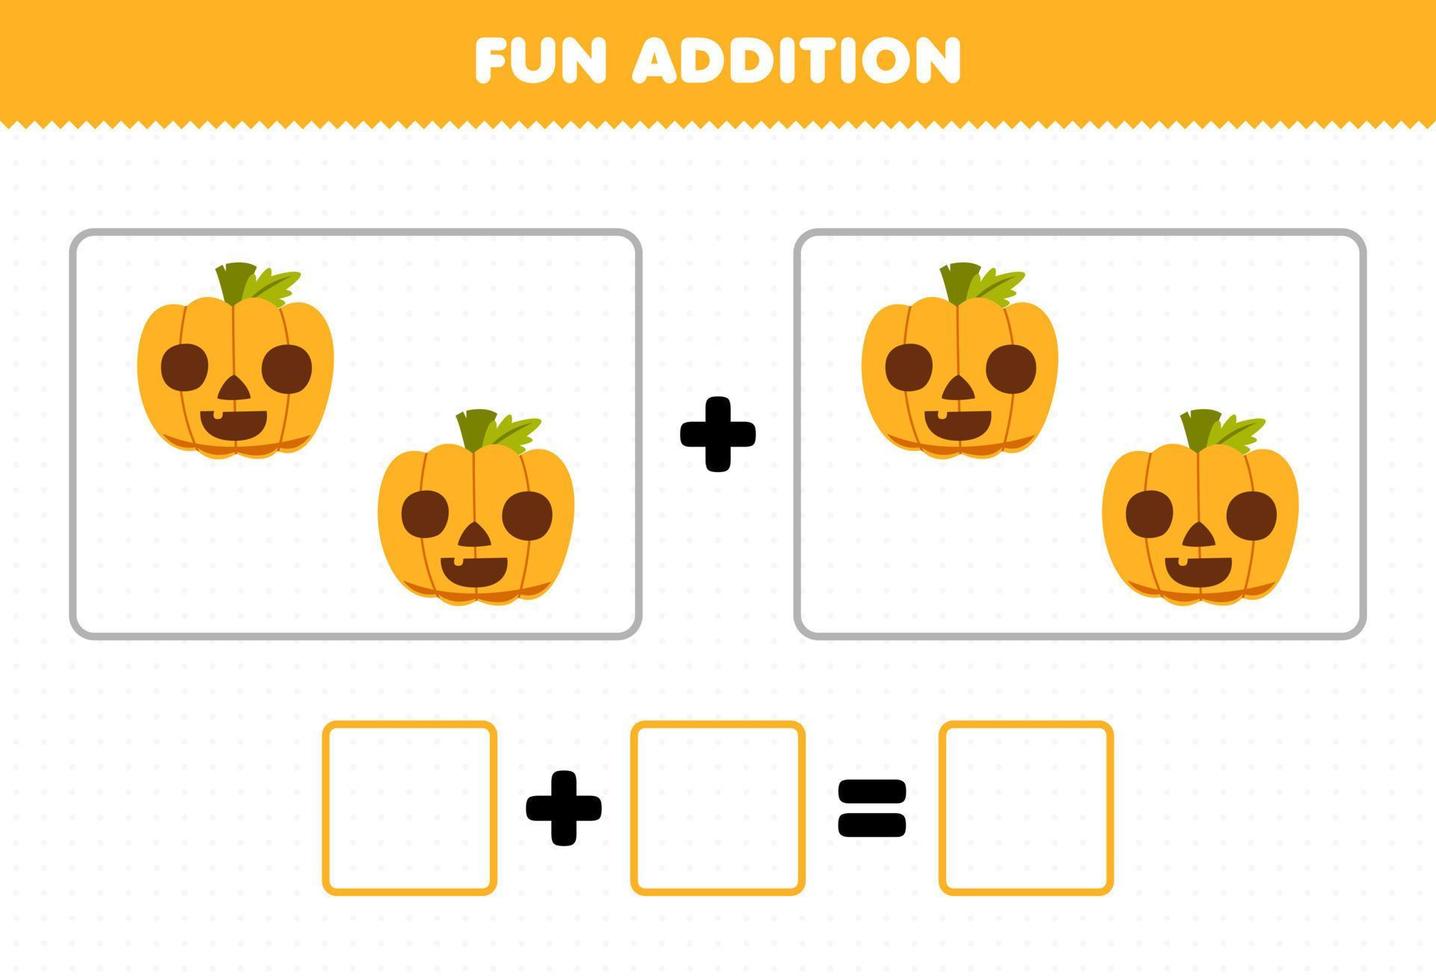 Education game for children fun addition by counting cute cartoon pumpkin with face pictures printable halloween worksheet vector